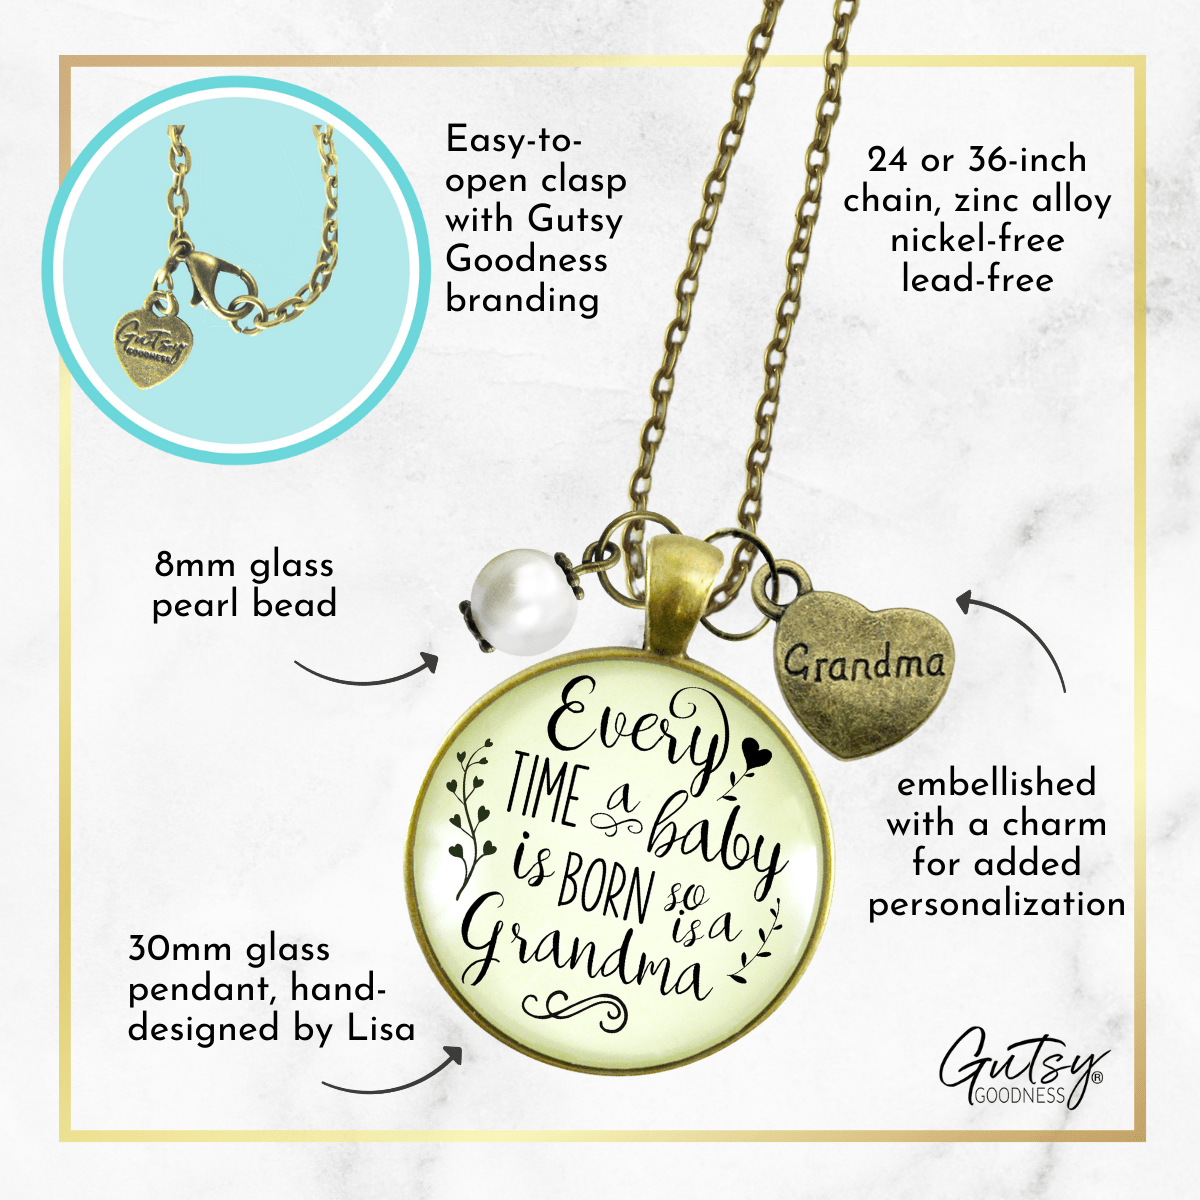 Gutsy Goodness New Grandma Necklace Every Time Baby Born Jewelry Gift from Daughter - Gutsy Goodness Handmade Jewelry;New Grandma Necklace Every Time Baby Born Jewelry Gift From Daughter - Gutsy Goodness Handmade Jewelry Gifts